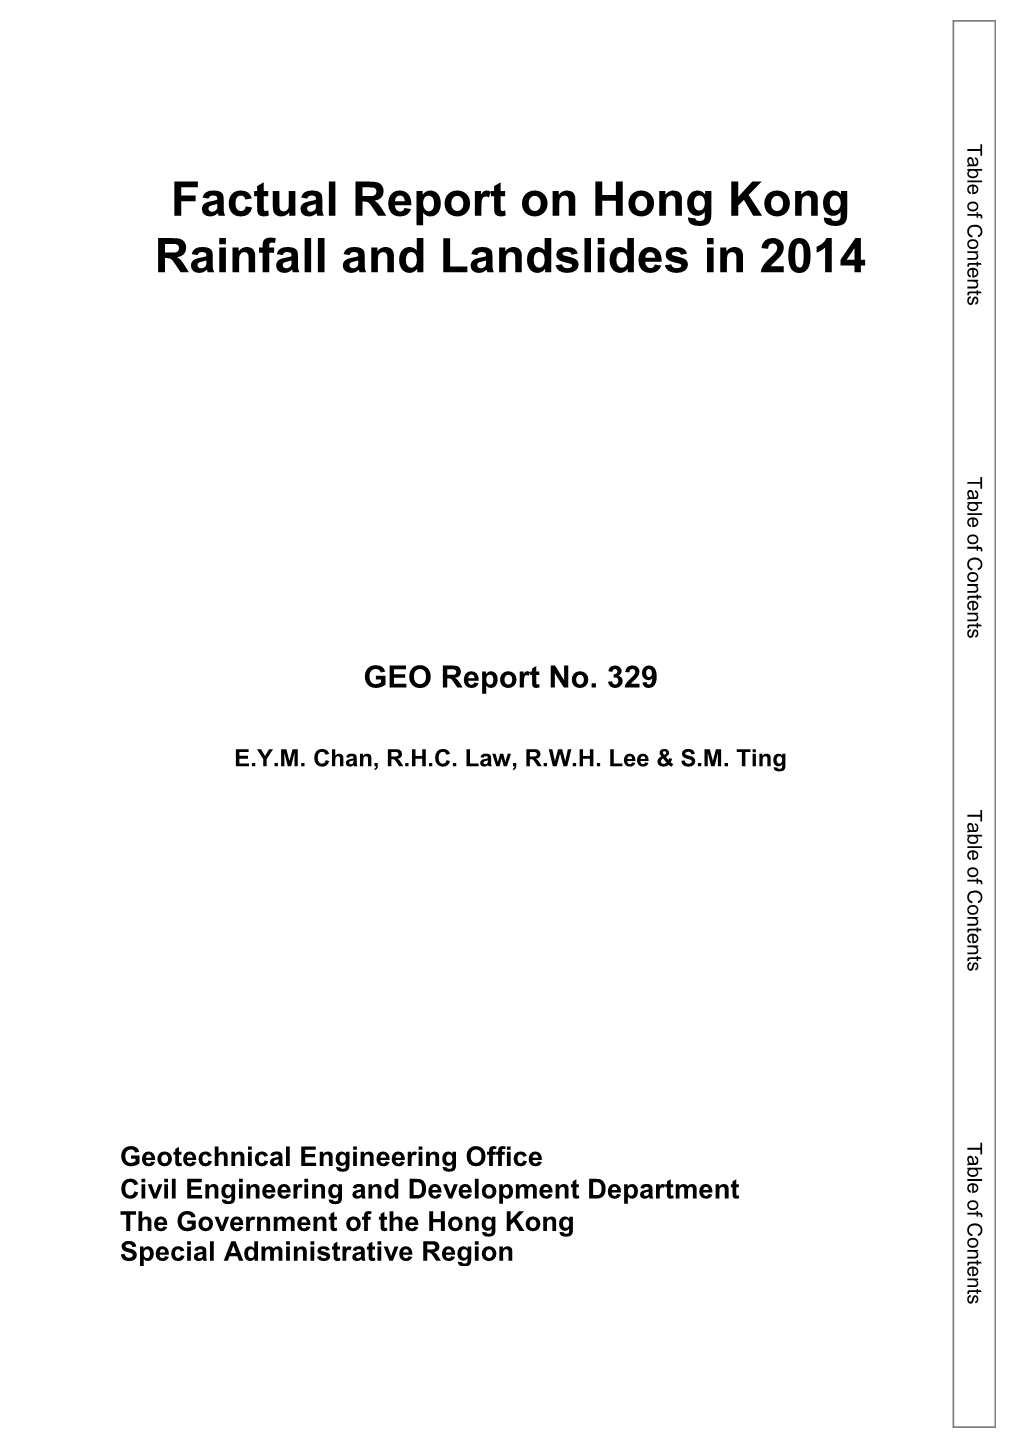 Factual Report on Hong Kong Rainfall and Landslides in 2014